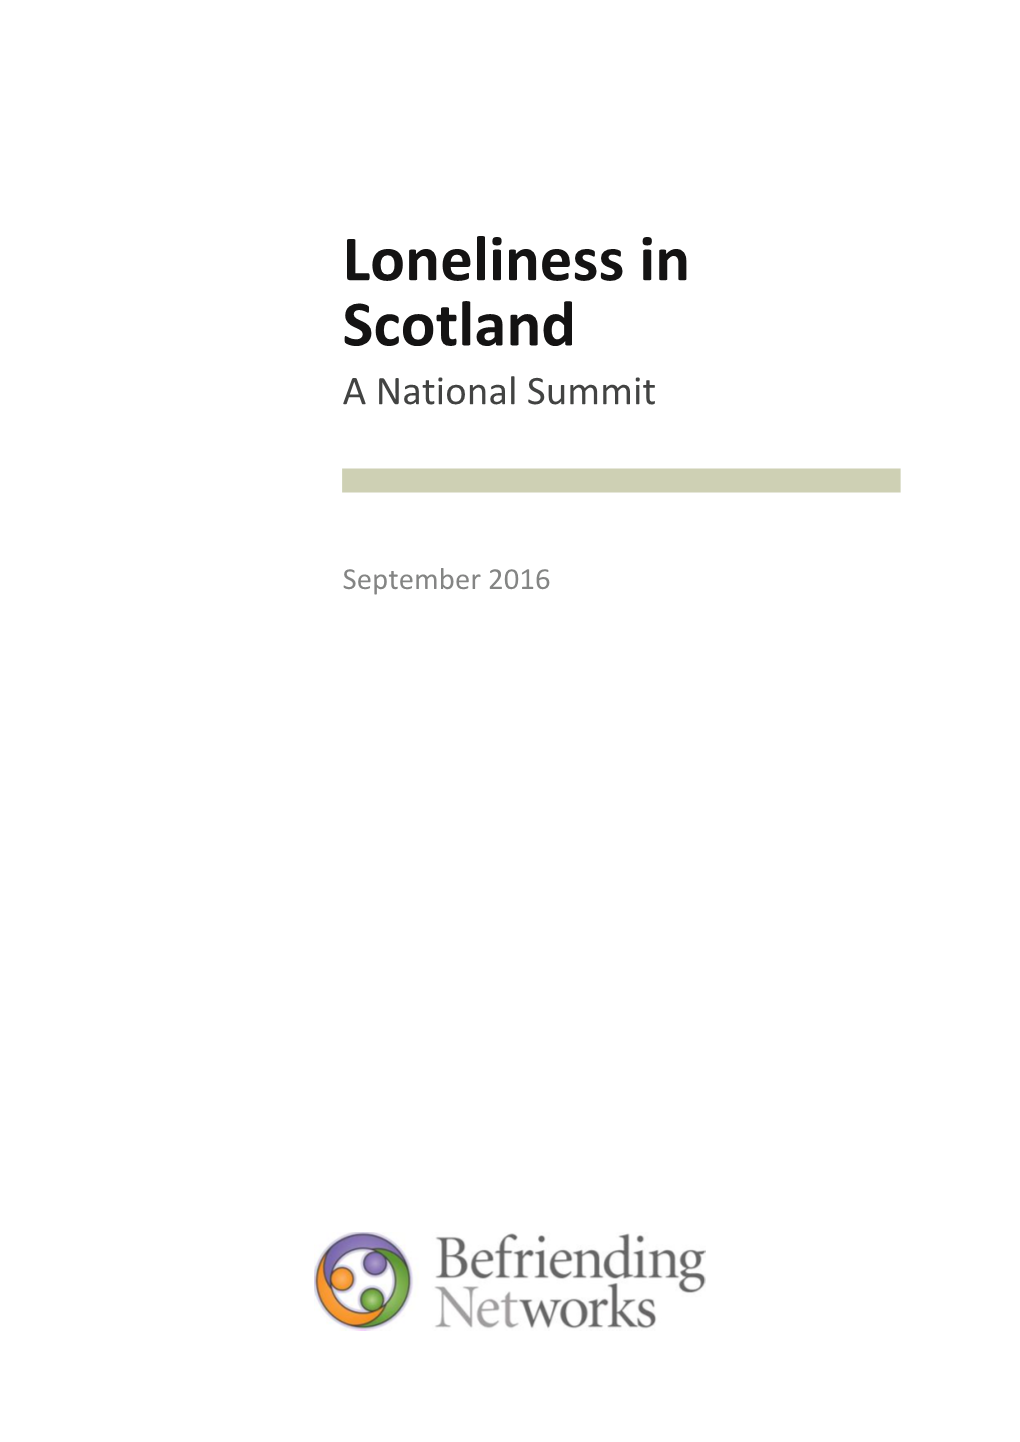 Loneliness in Scotland a National Summit